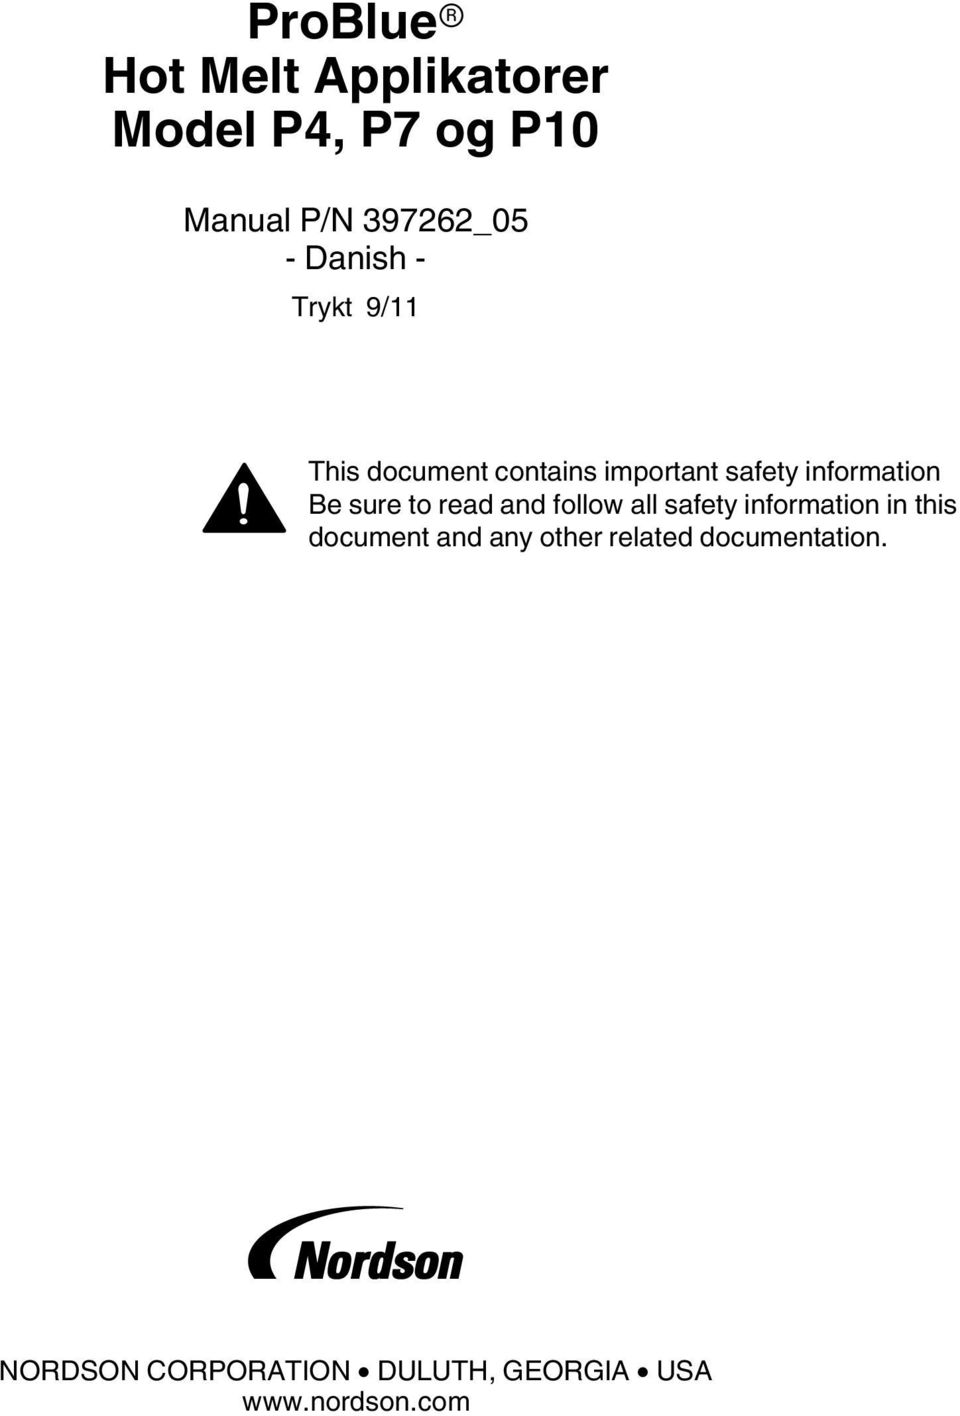 sure to read and follow all safety information in this document and any